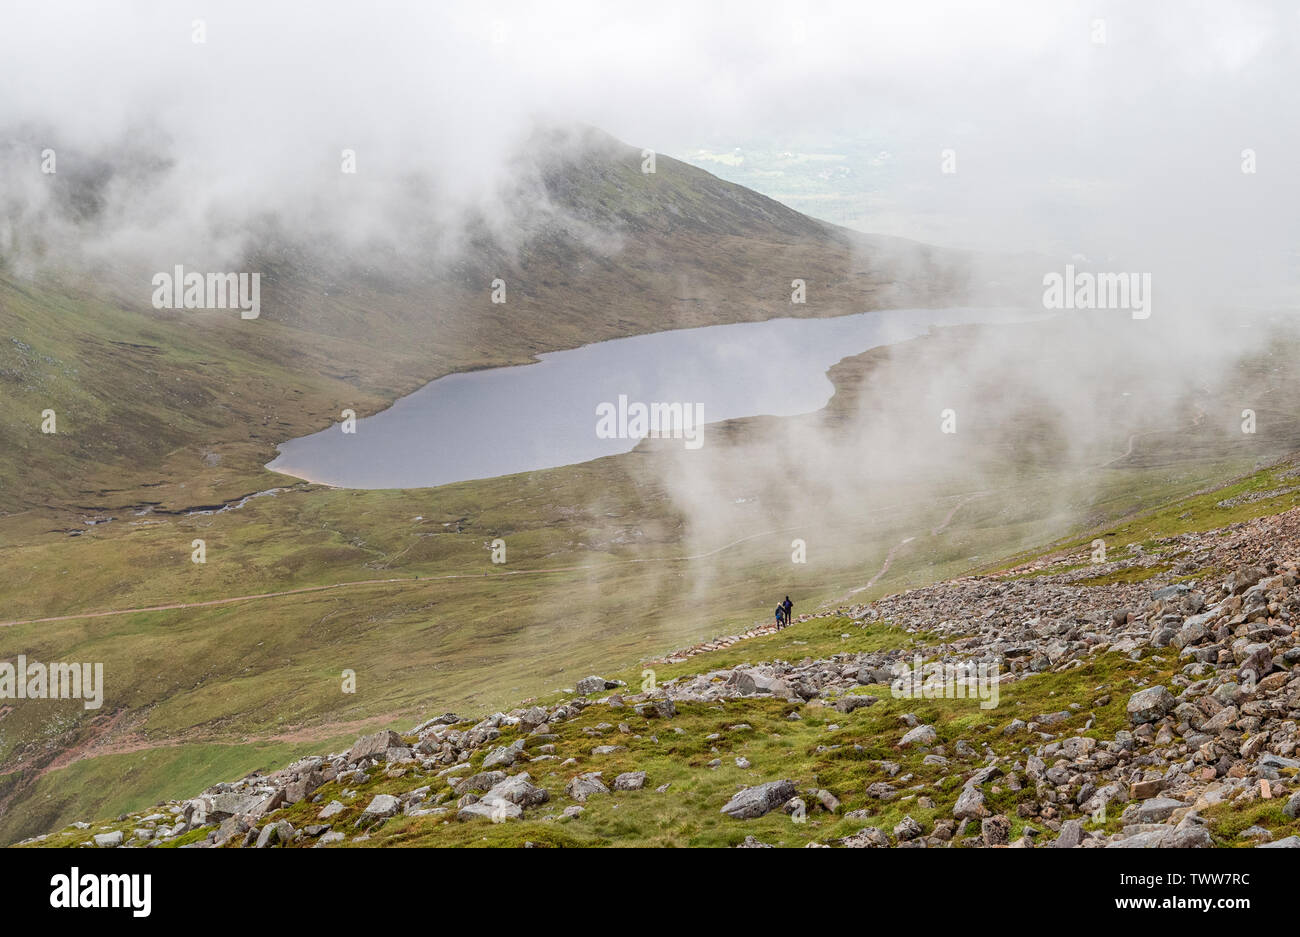 Walkers looking out over Lochan Meall on the ascent to the summit of Ben Nevis in the Highlands of Scotland UK on a typically cloudy day Stock Photo